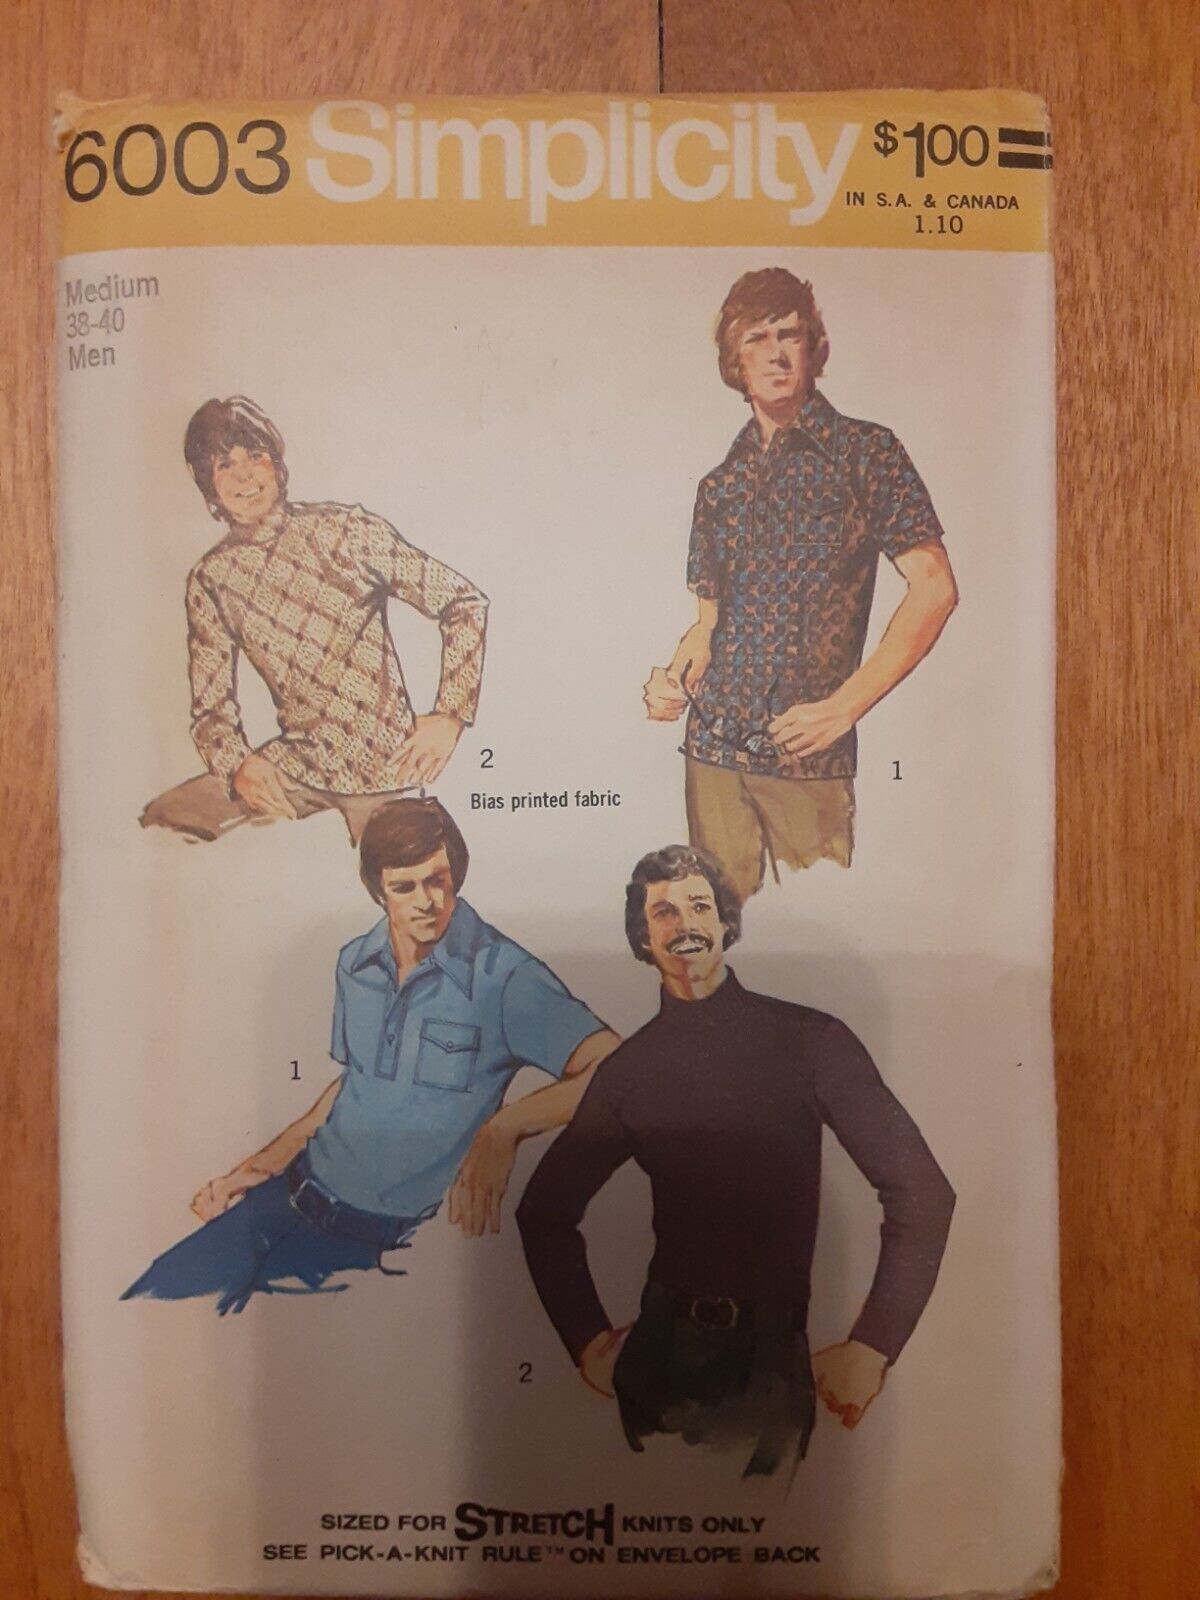 1973 Simplicity # 6003 Men's Size 38-40 Medium Shirts-2 Styles For Stretch Knit